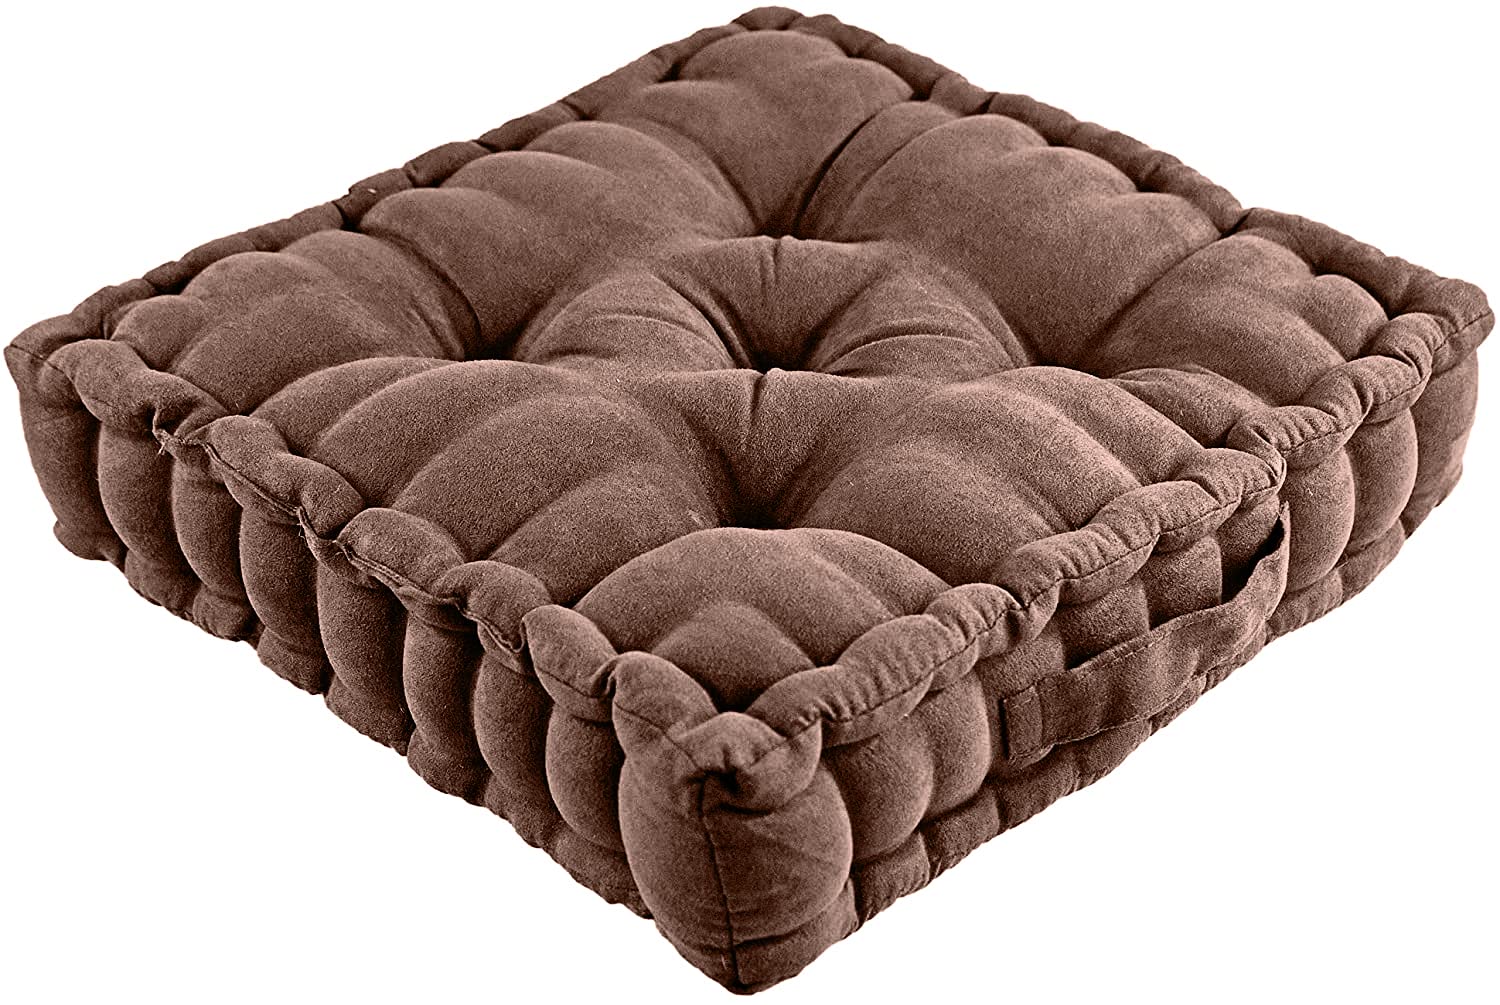 Brown Armchair Booster Cushion | Extra 10cm Lift to Help Get Up & Down Easier | 100% Cotton Cover | Firm Support, Comfortable & Durable | Ideal For Elderly, Disabled & Mobility issues | From Easylife